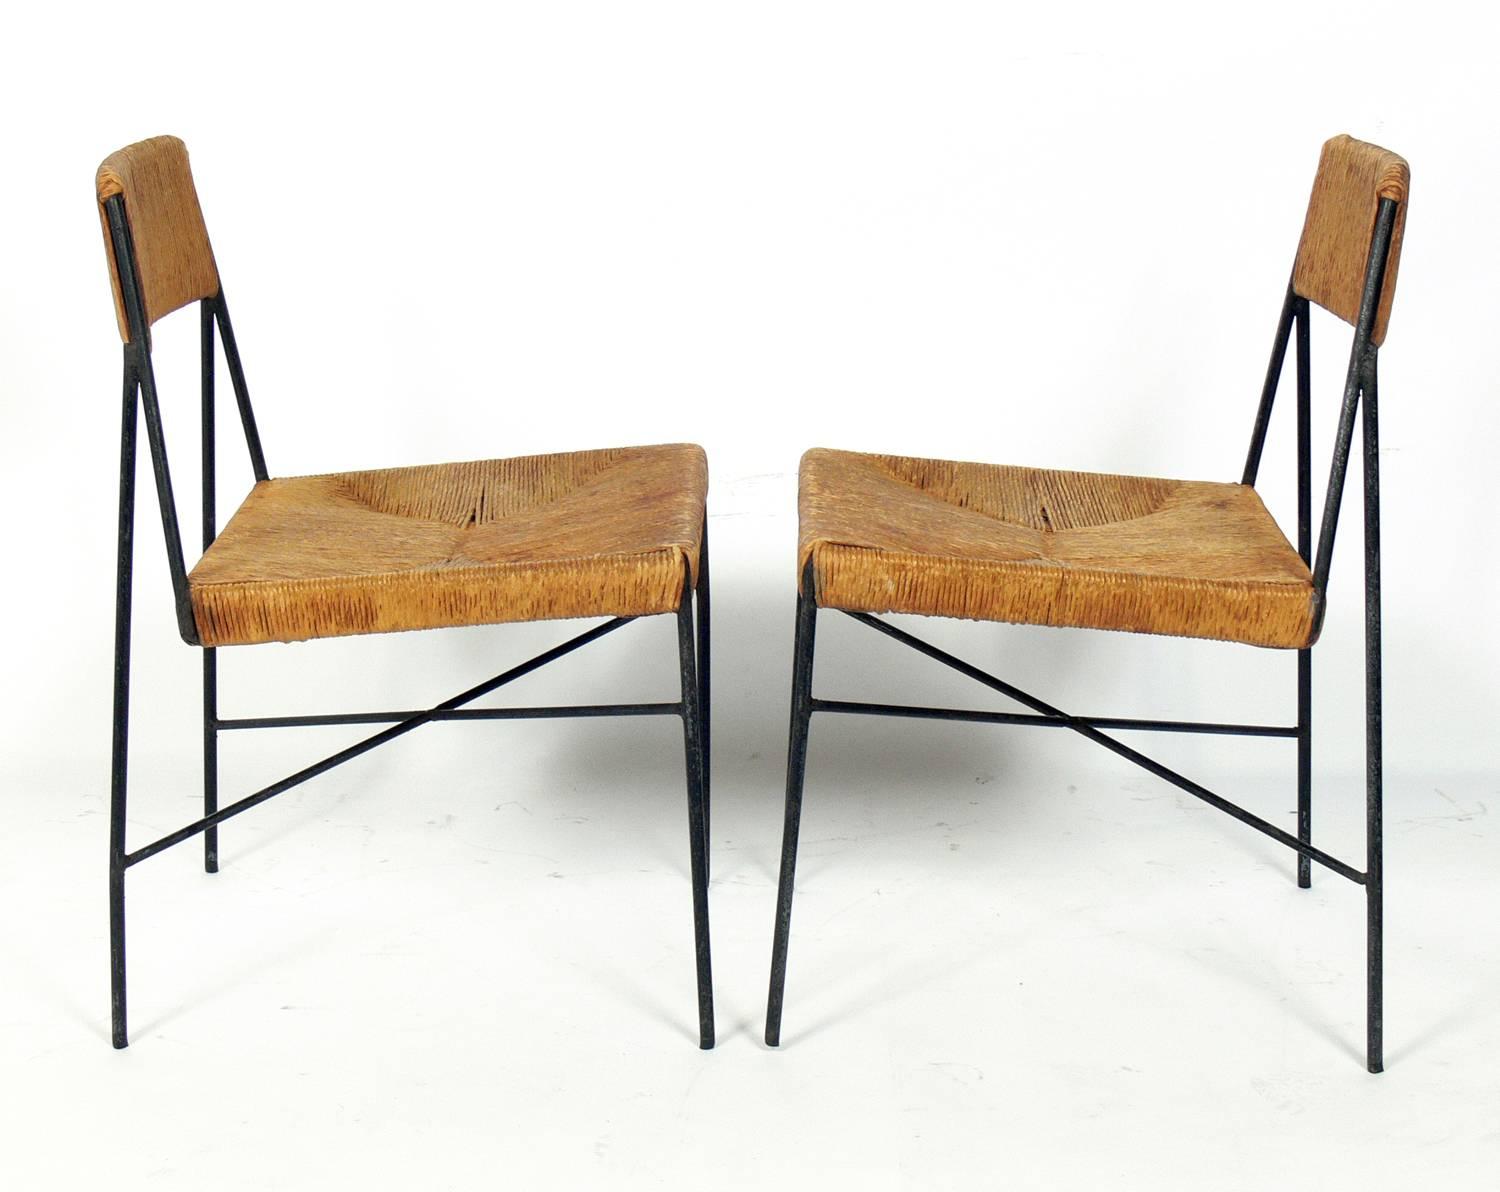 Pair of rare low slung lounge chairs, designed by Arthur Umanoff for Shaver Howard, American, circa 1950s. They retain their warm original patina.